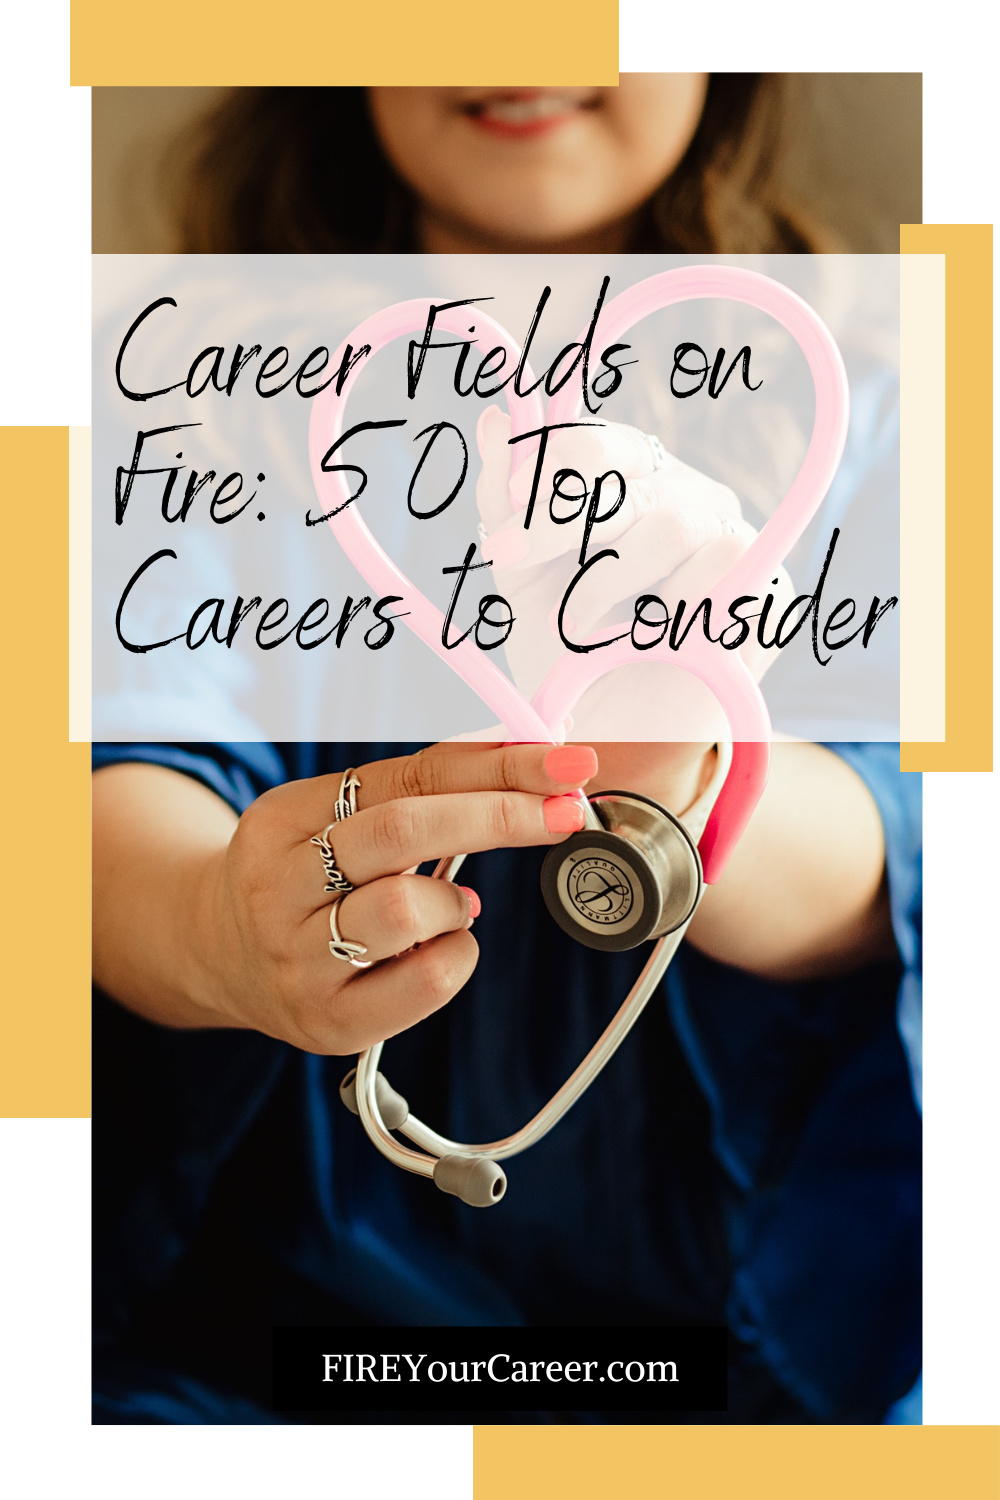 Career Fields on Fire 50 Top Careers to Consider